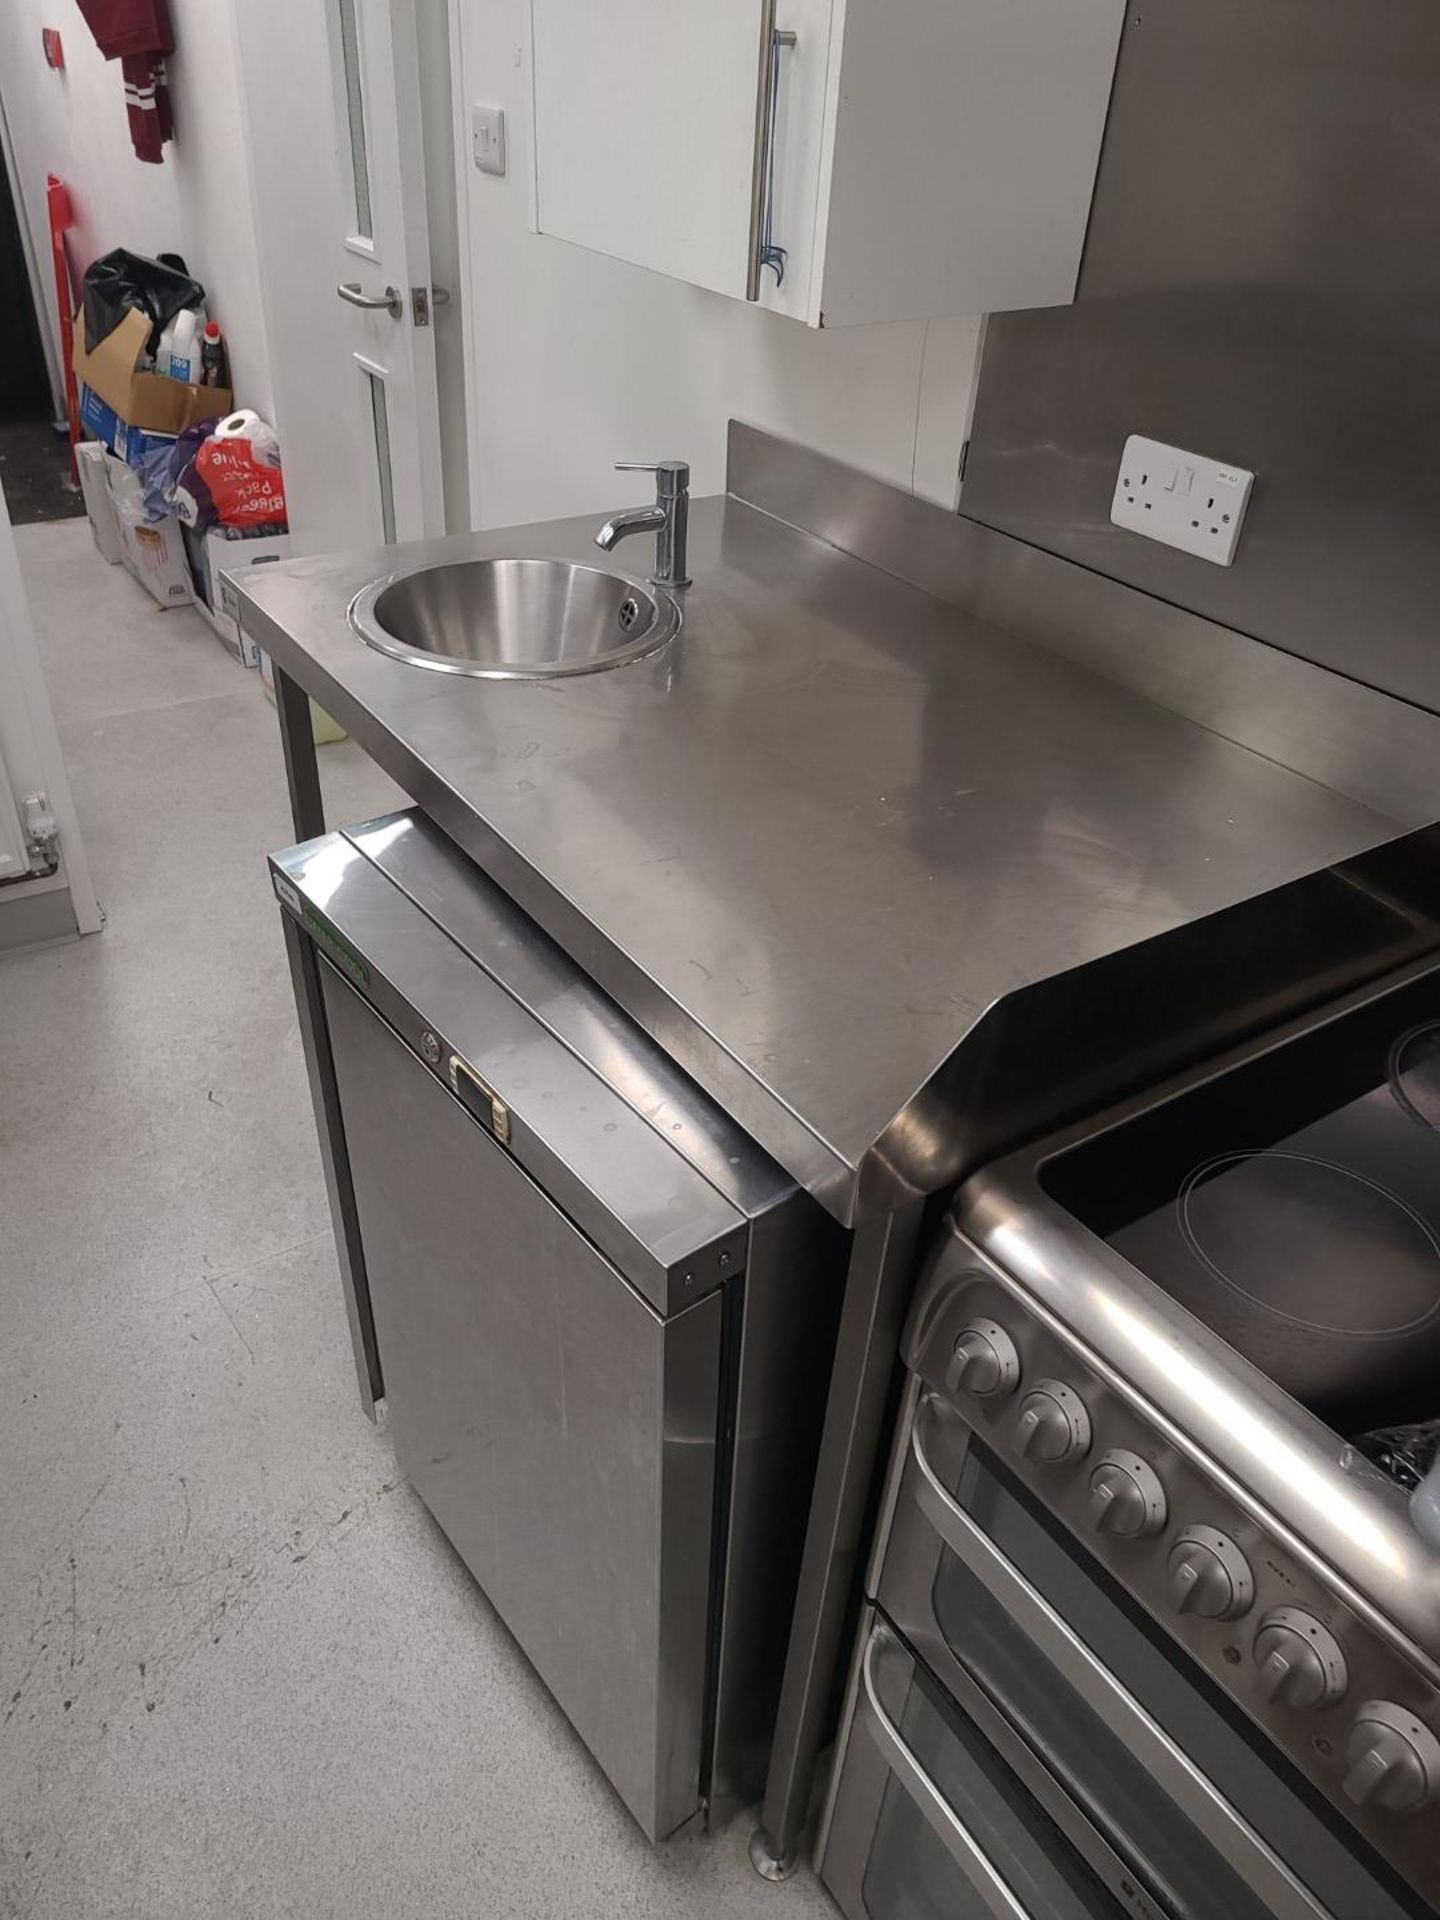 1 X PARRY Free Standing Stainless Steel Prep Table With Sink, Fixtures And Adjustable Feet - Image 5 of 6